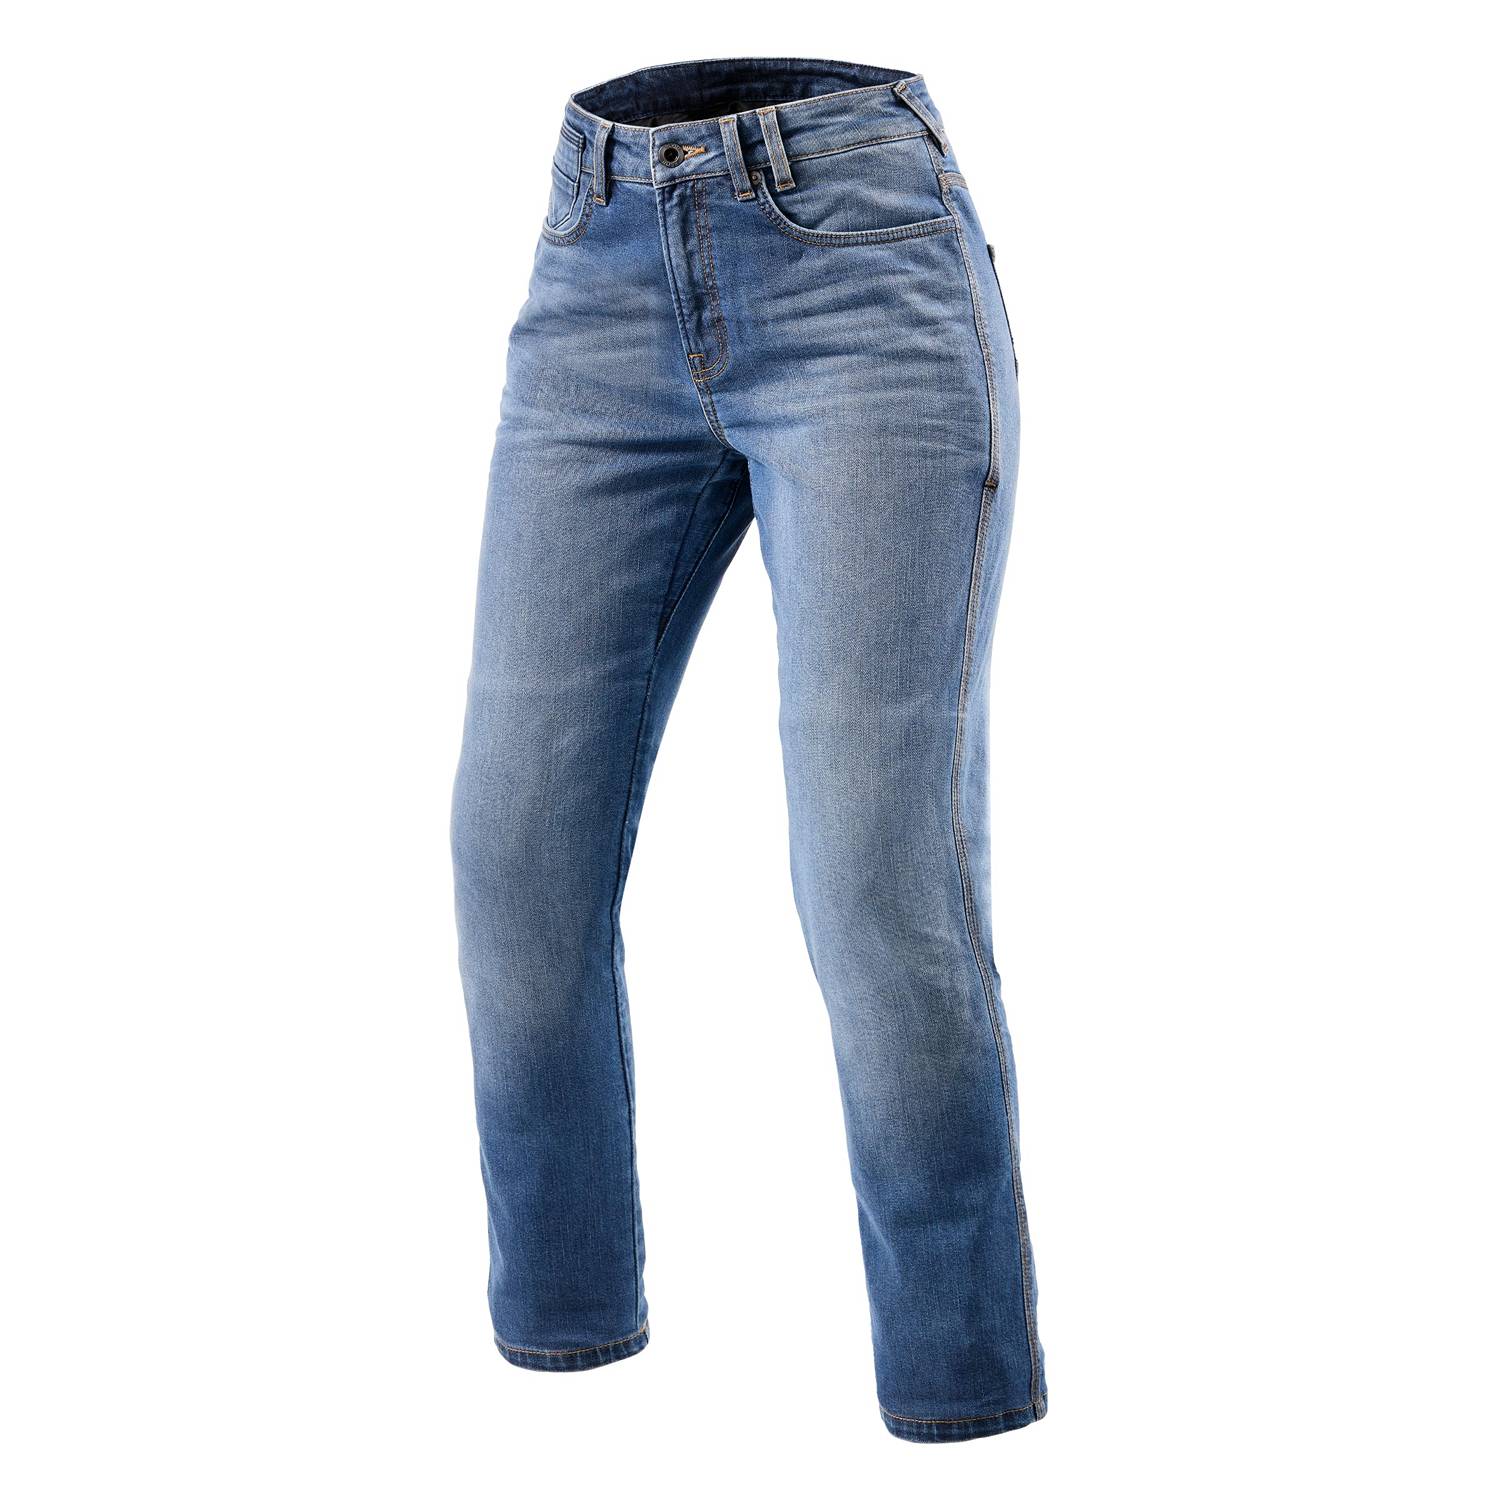 Image of REV'IT! Jeans Victoria 2 Ladies SF Classic Blue Used Motorcycle Jeans Size L32/W36 ID 8700001342889